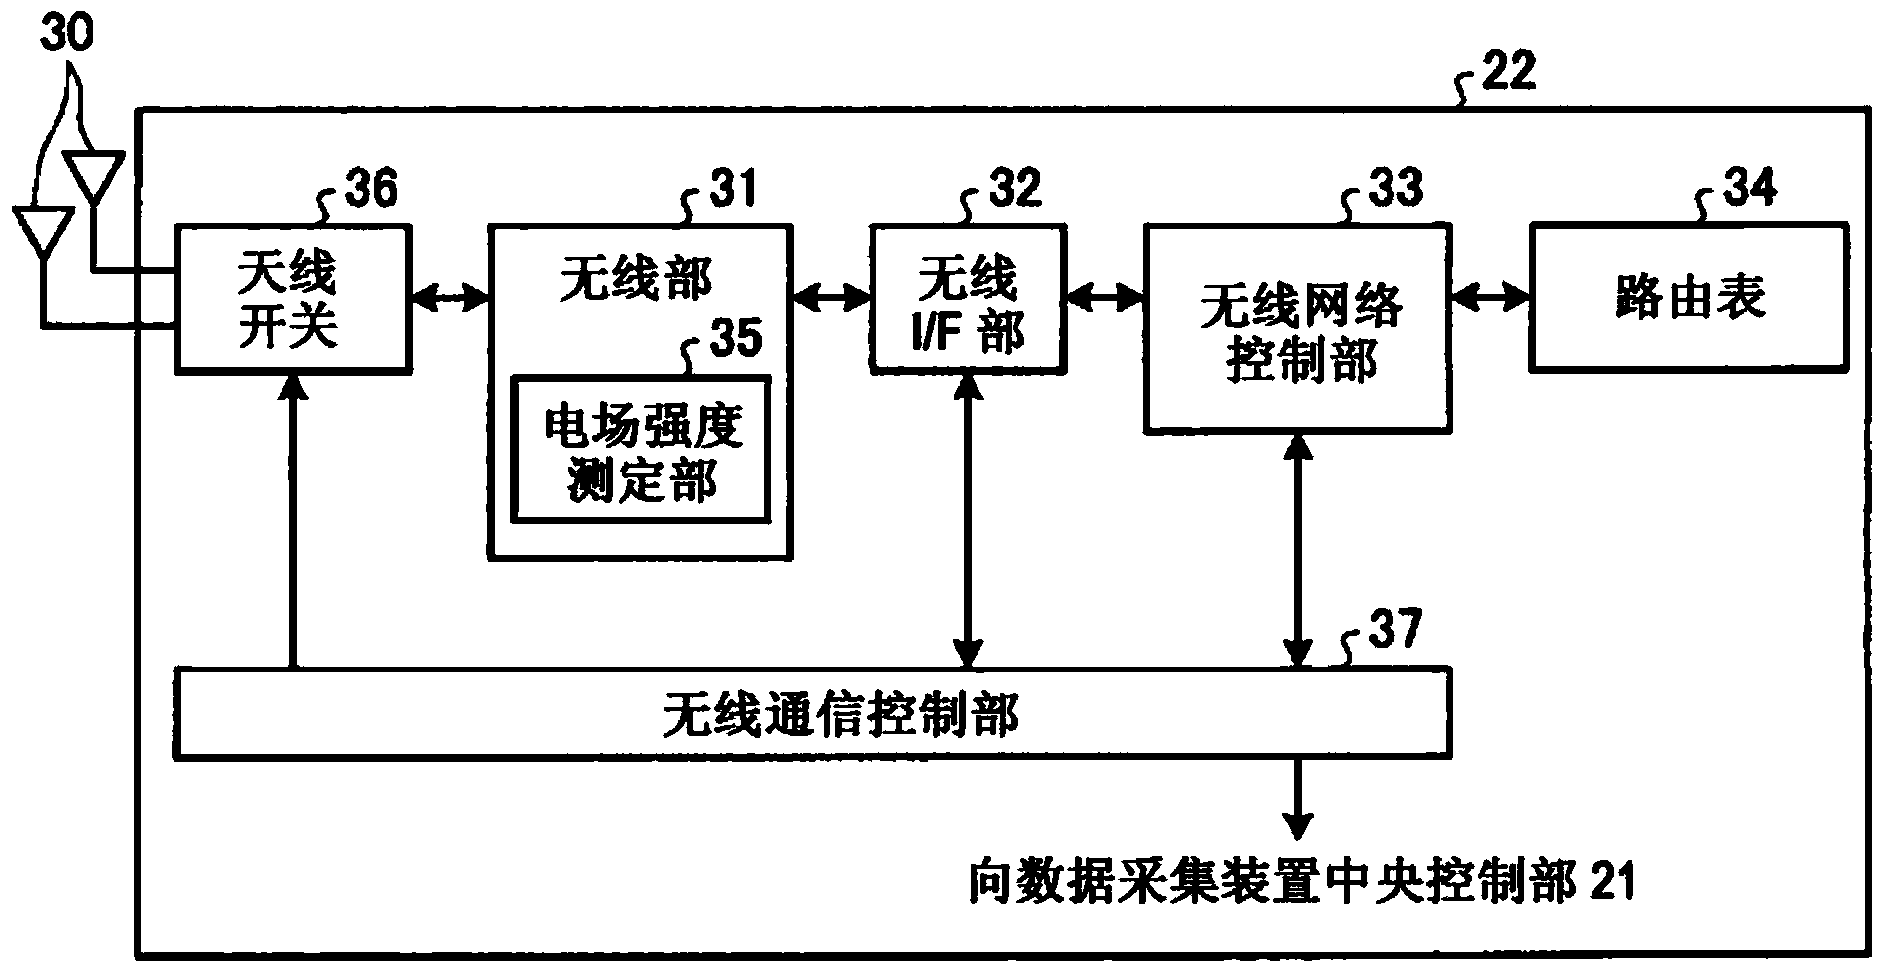 Electricity meter, method for detecting theft of electricity meter, and power supply system